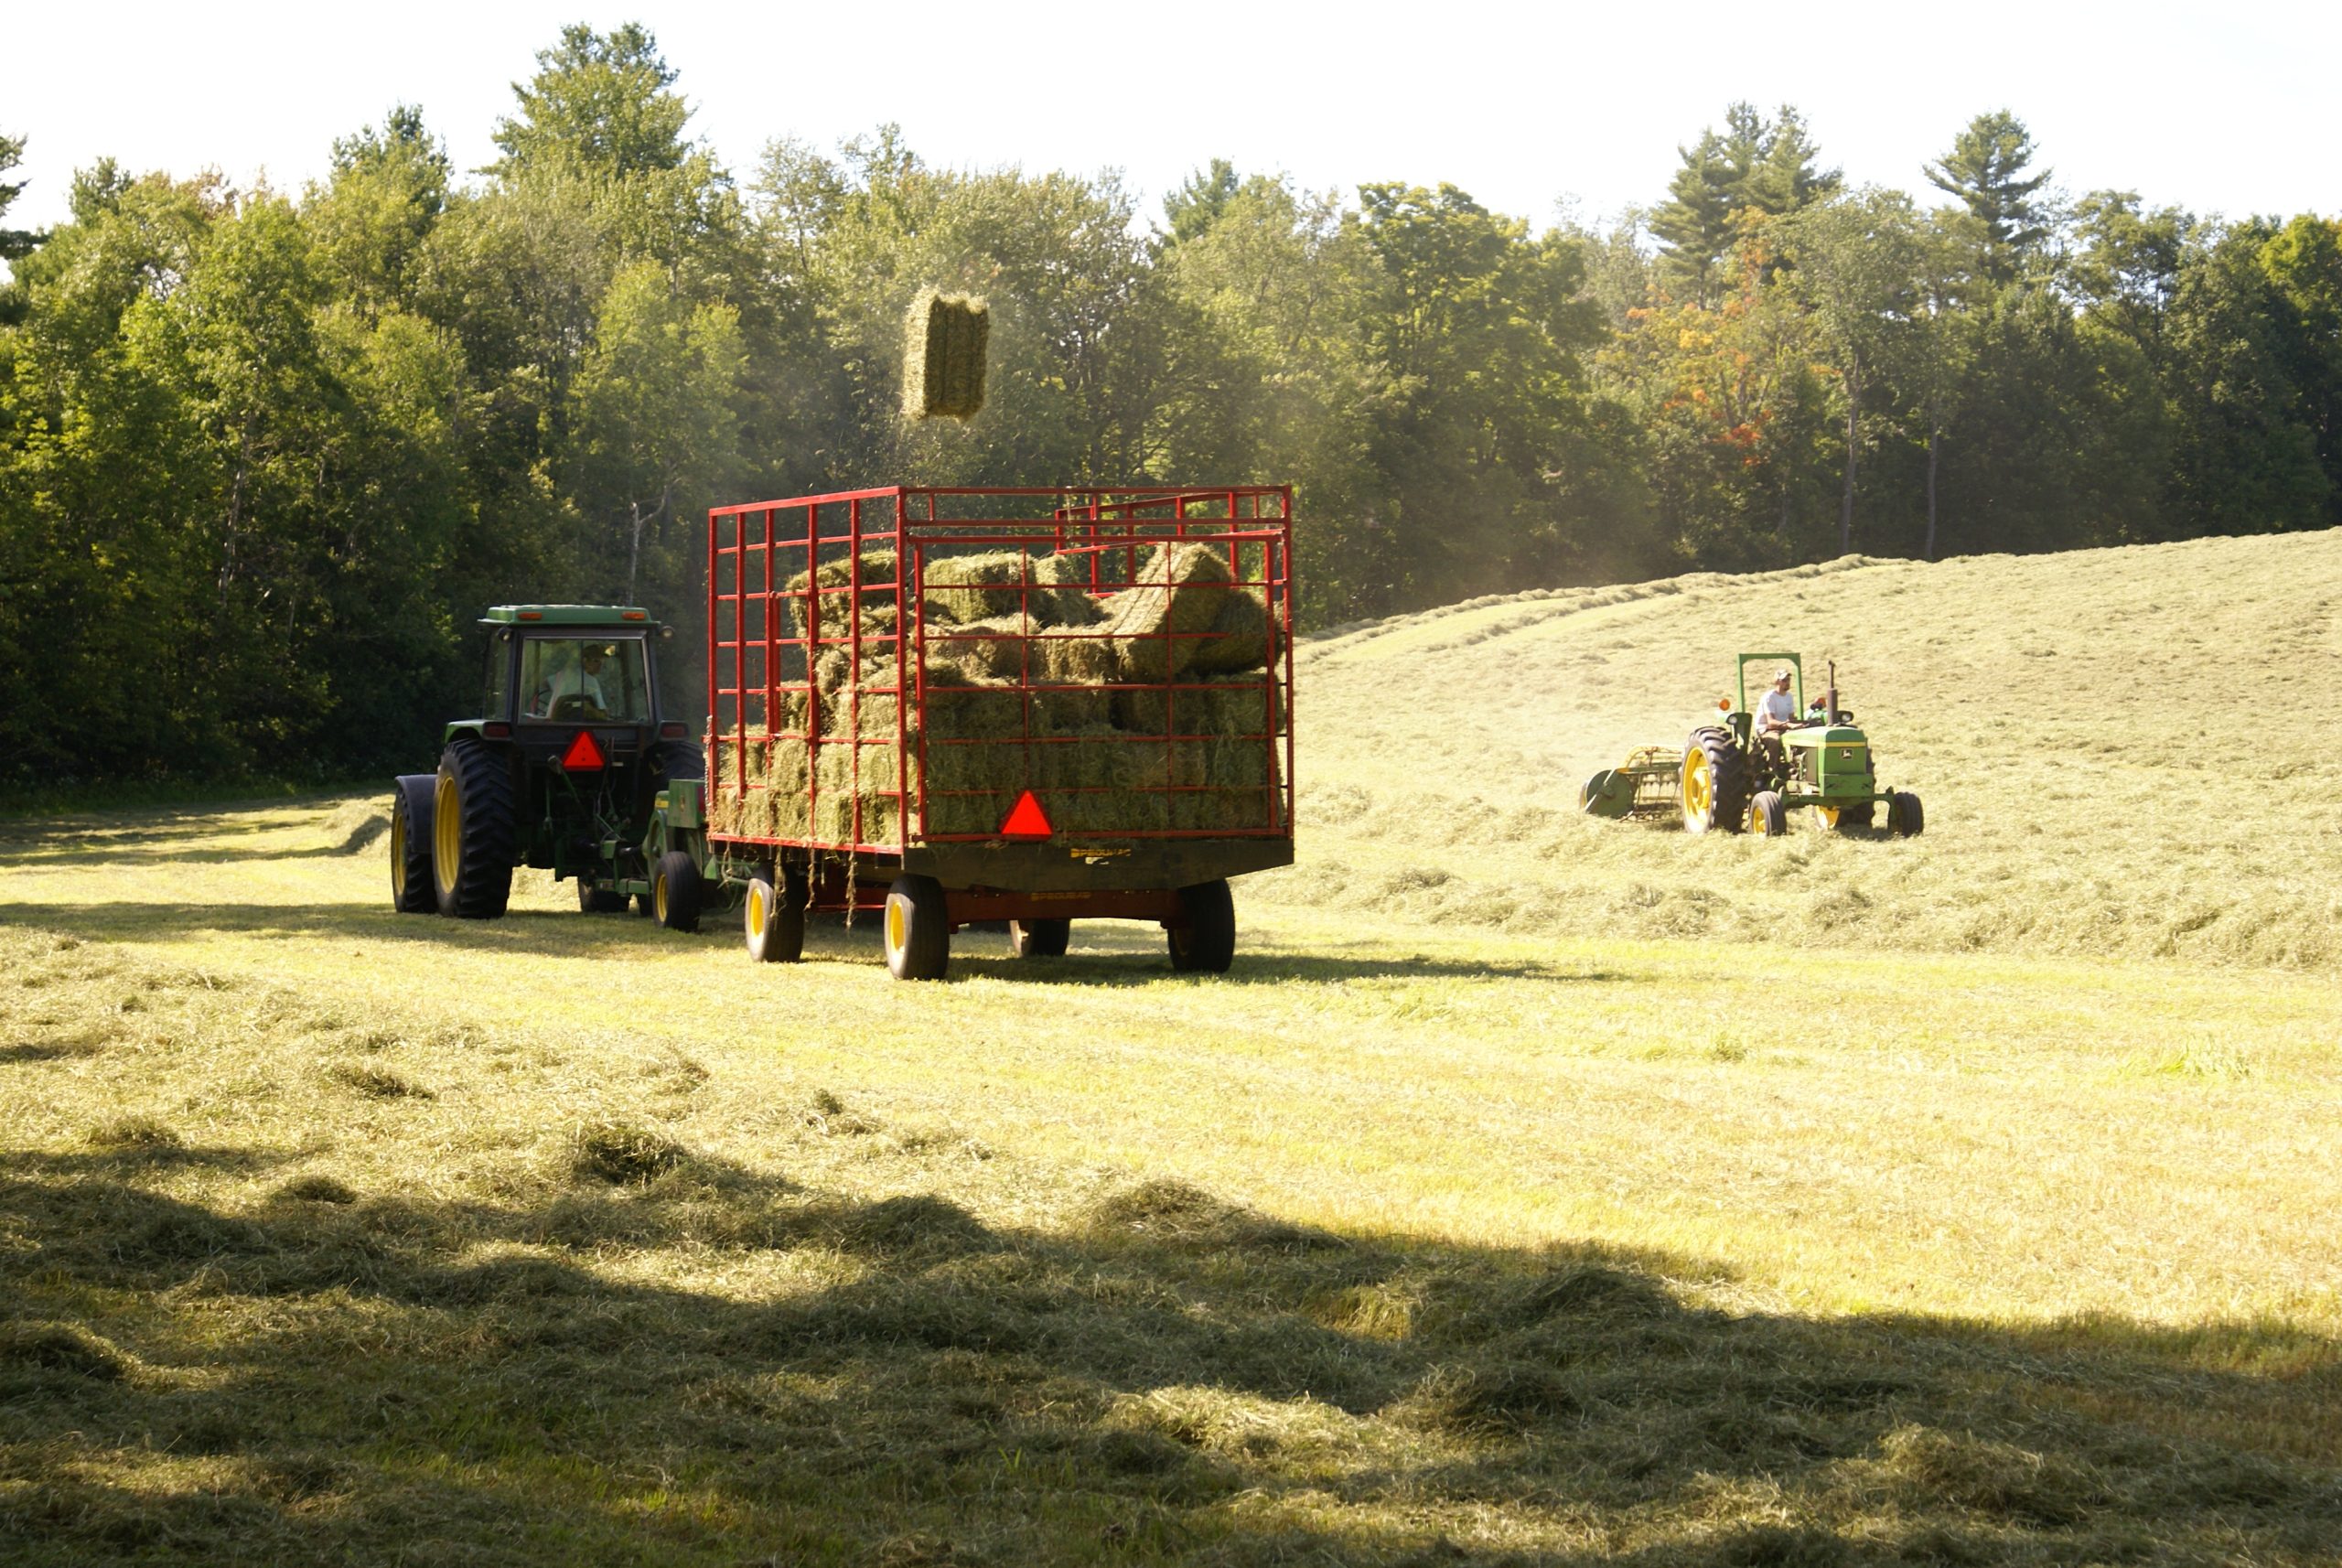 Baling Hay 2 (user submitted)